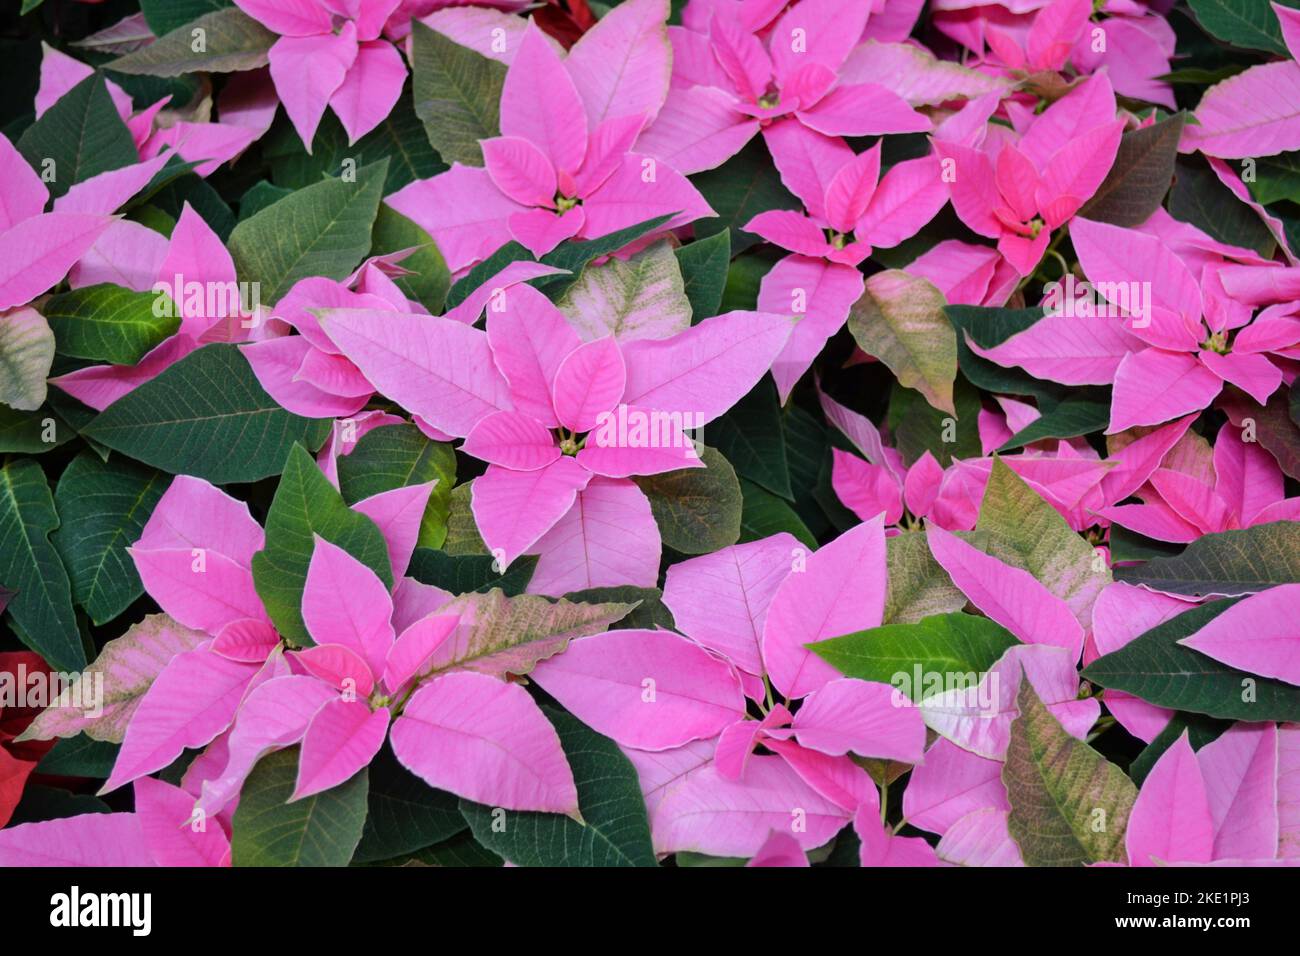 Bright pink poinsettia flowers, otherwise called Christmas star, with dark green leaves. Flower pink background. Copy space Stock Photo